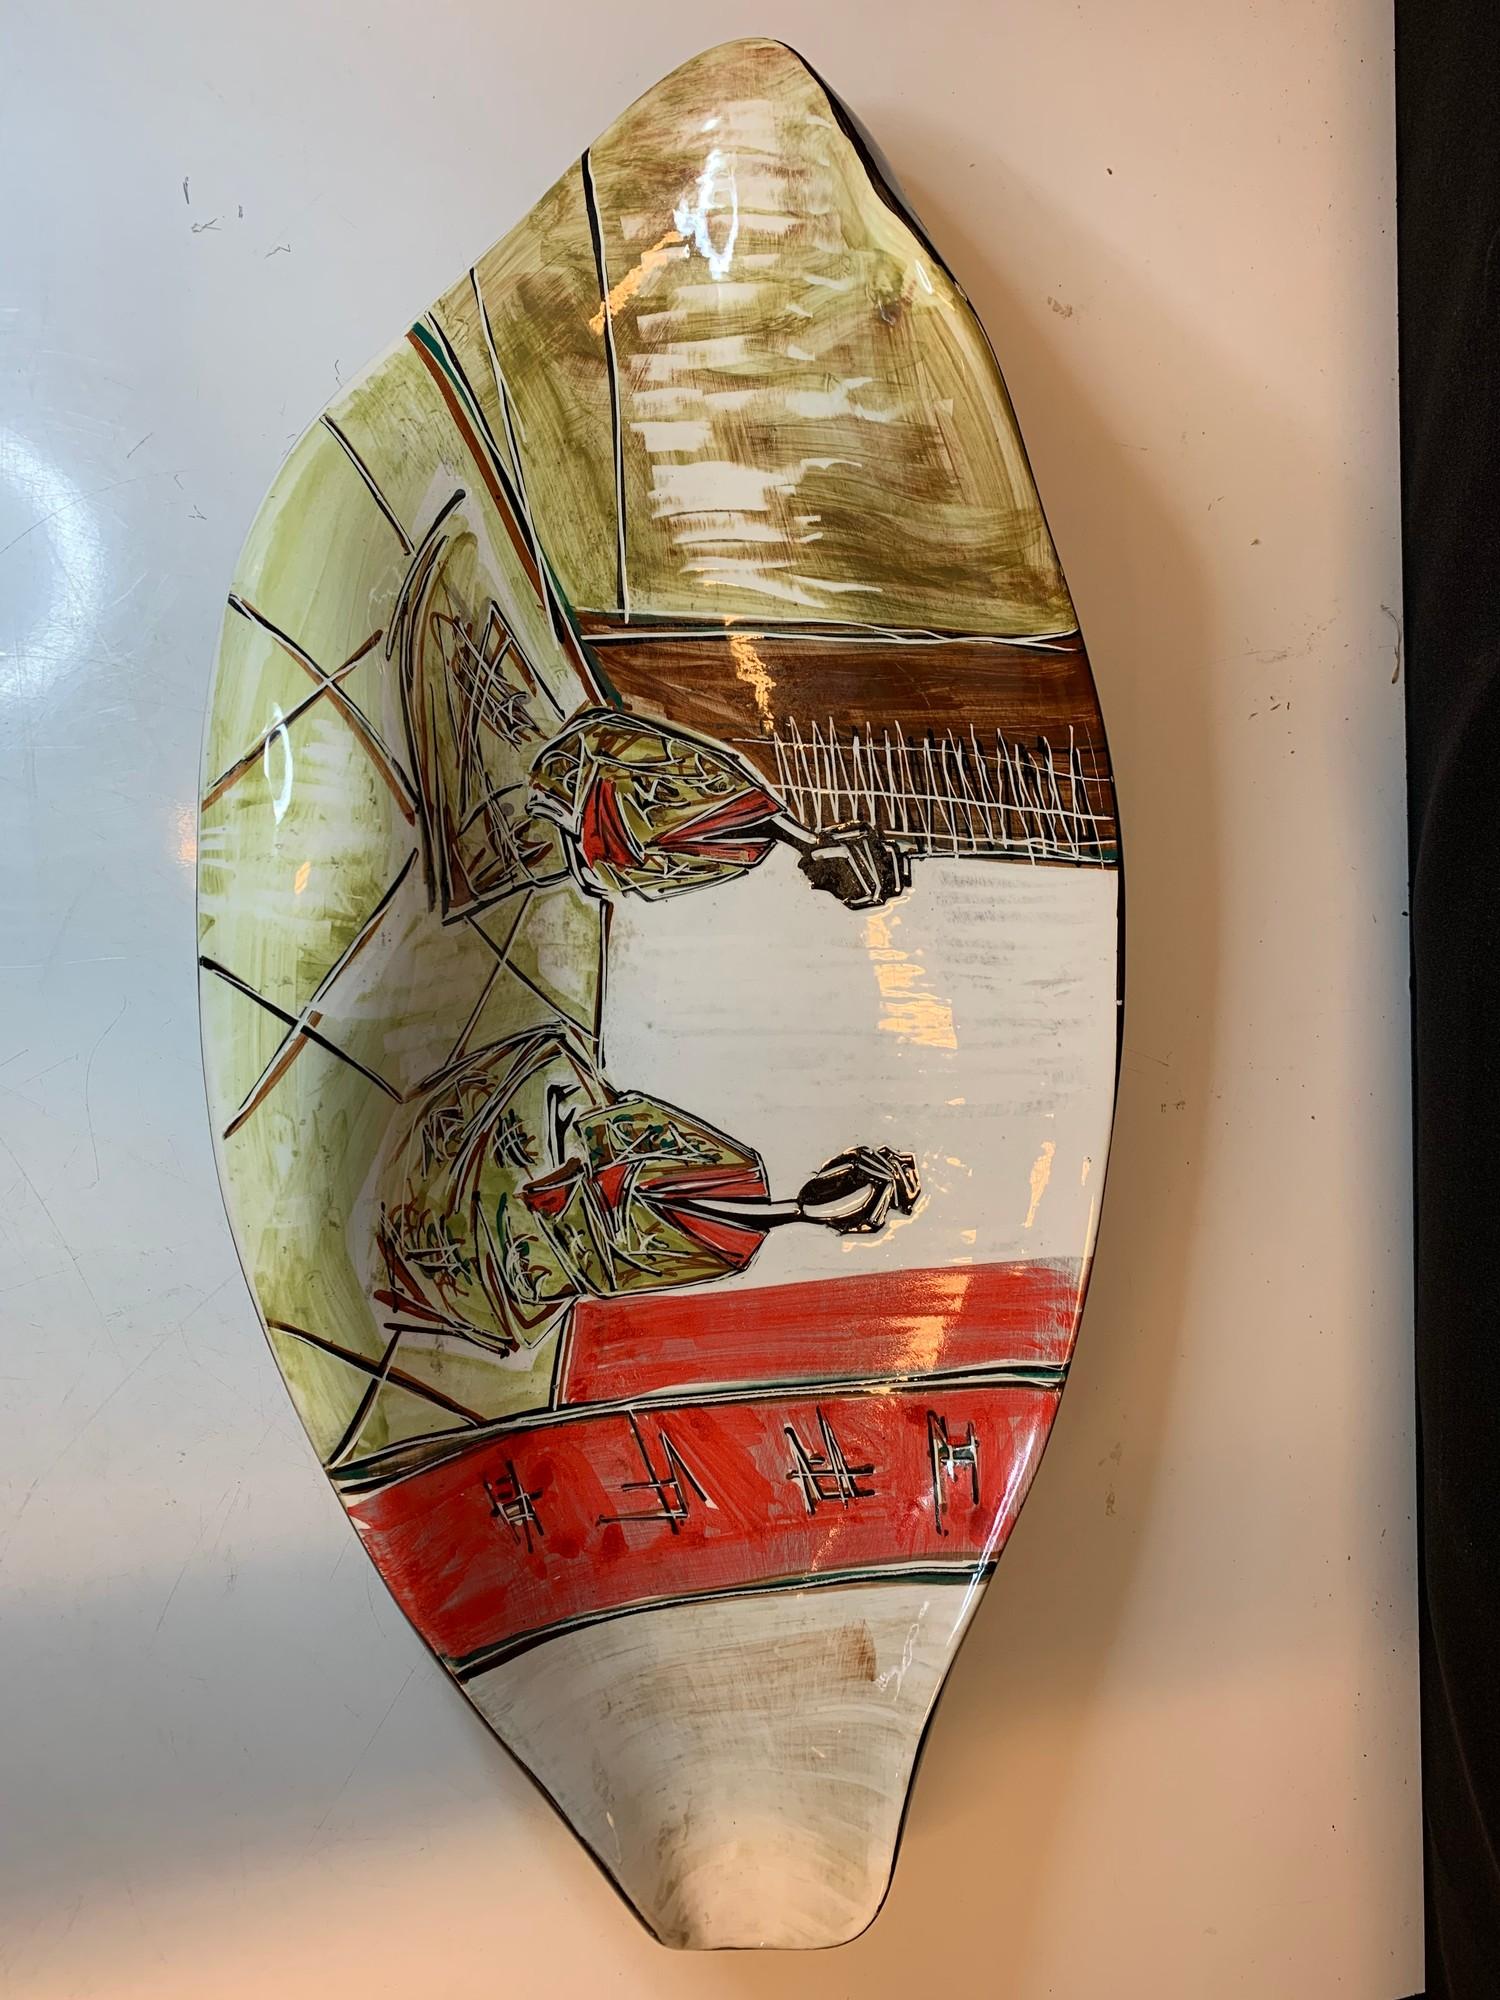 Italian ceramic 1950s style hand painted with the Japanese influence. Signed by Donatella - Image 3 of 7